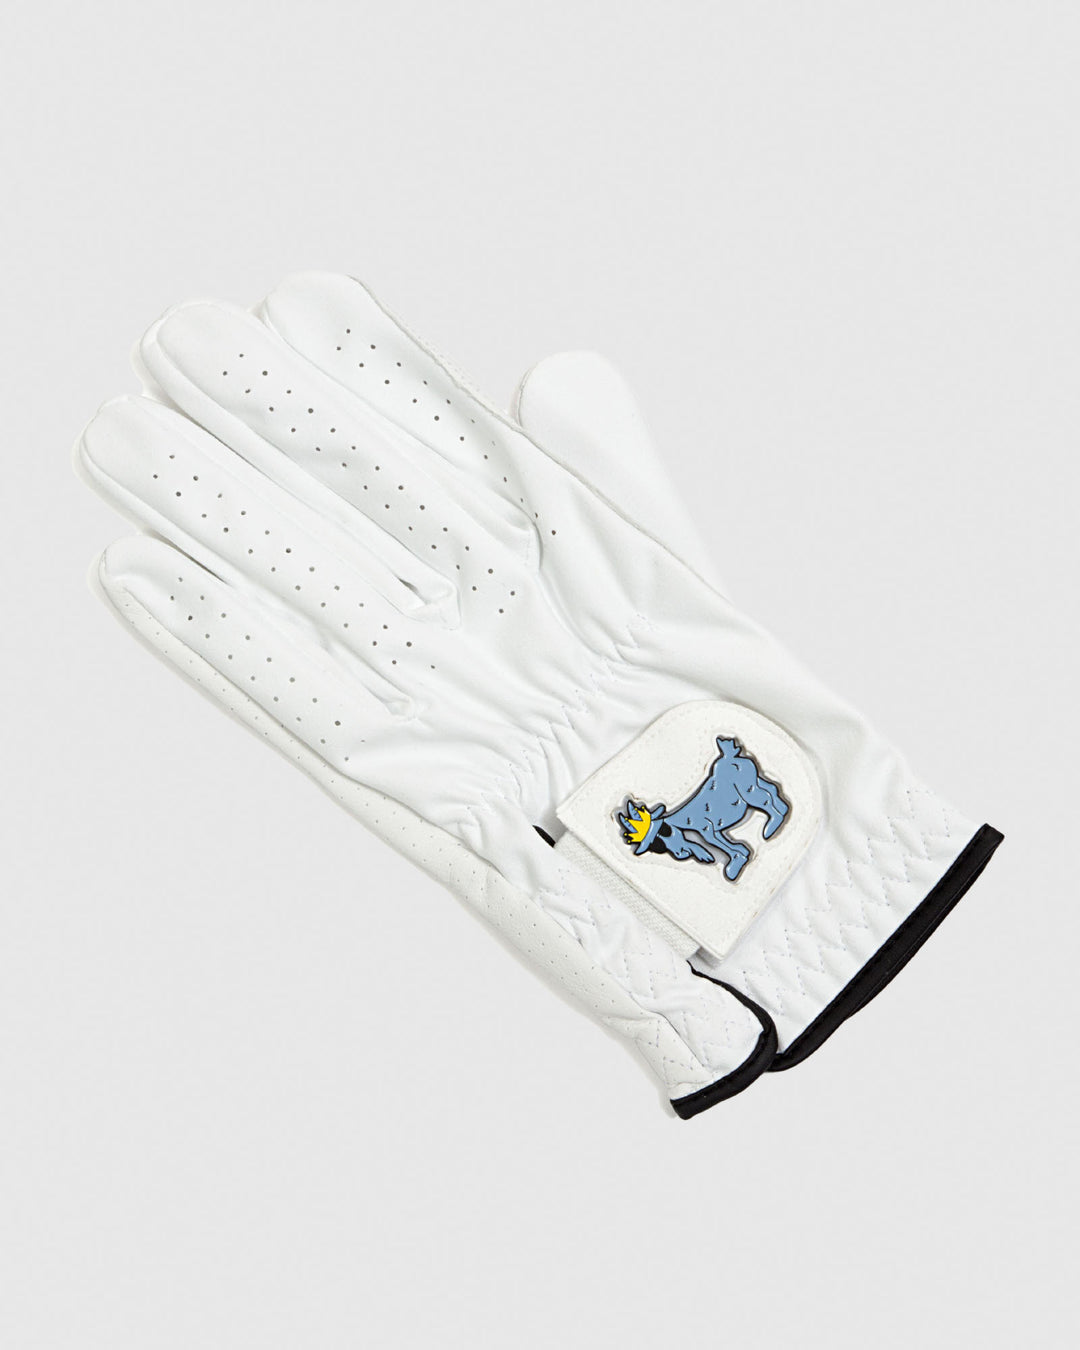 White golf glove with blue goat ball marker